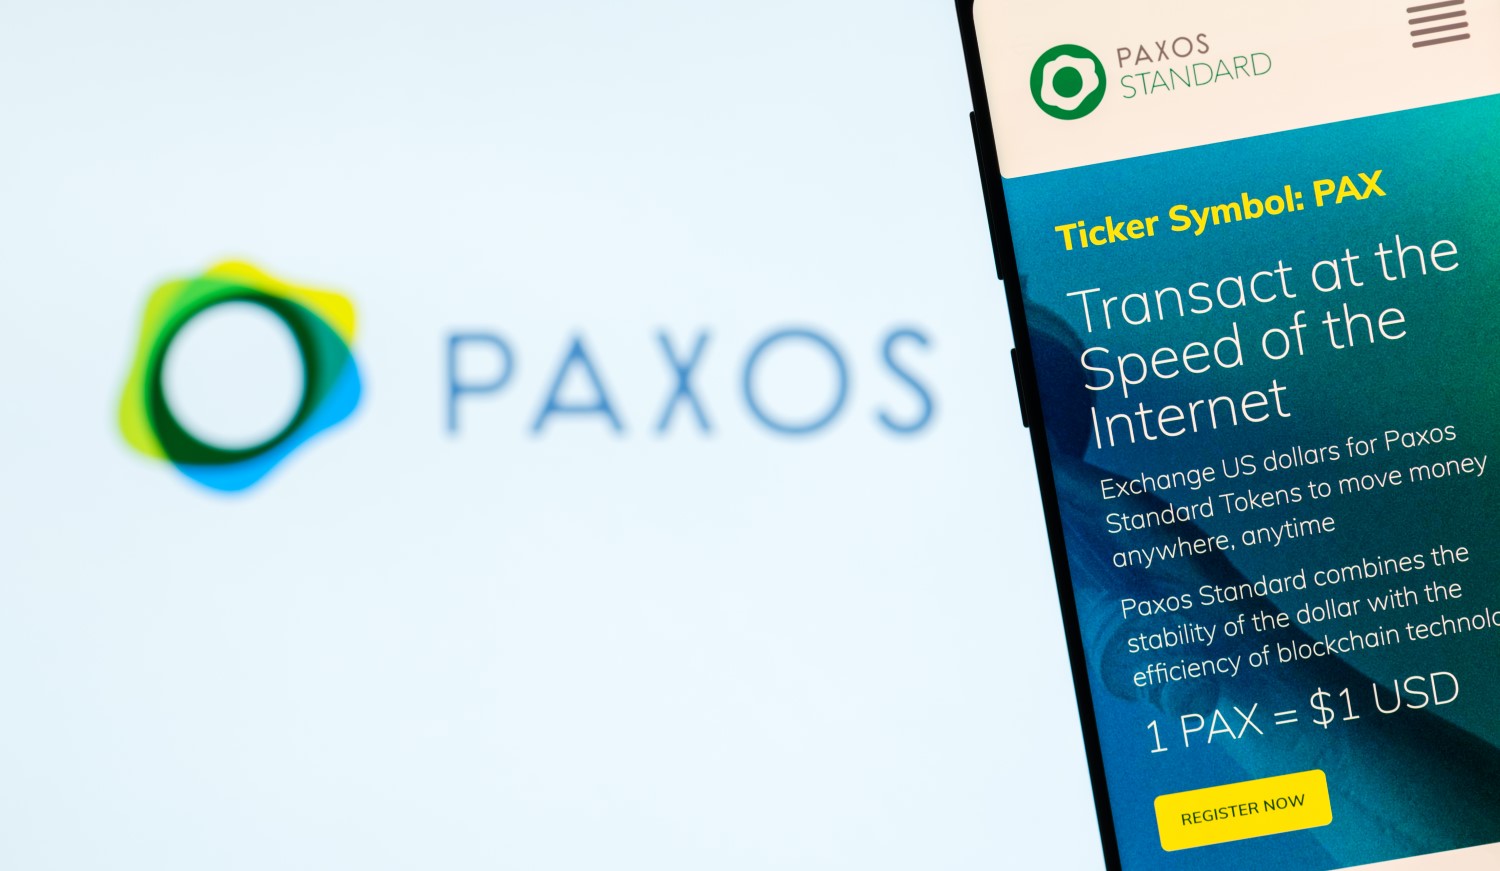 Up To $100 Million Paxos Stablecoins To Be Issued On Ontology Blockchain